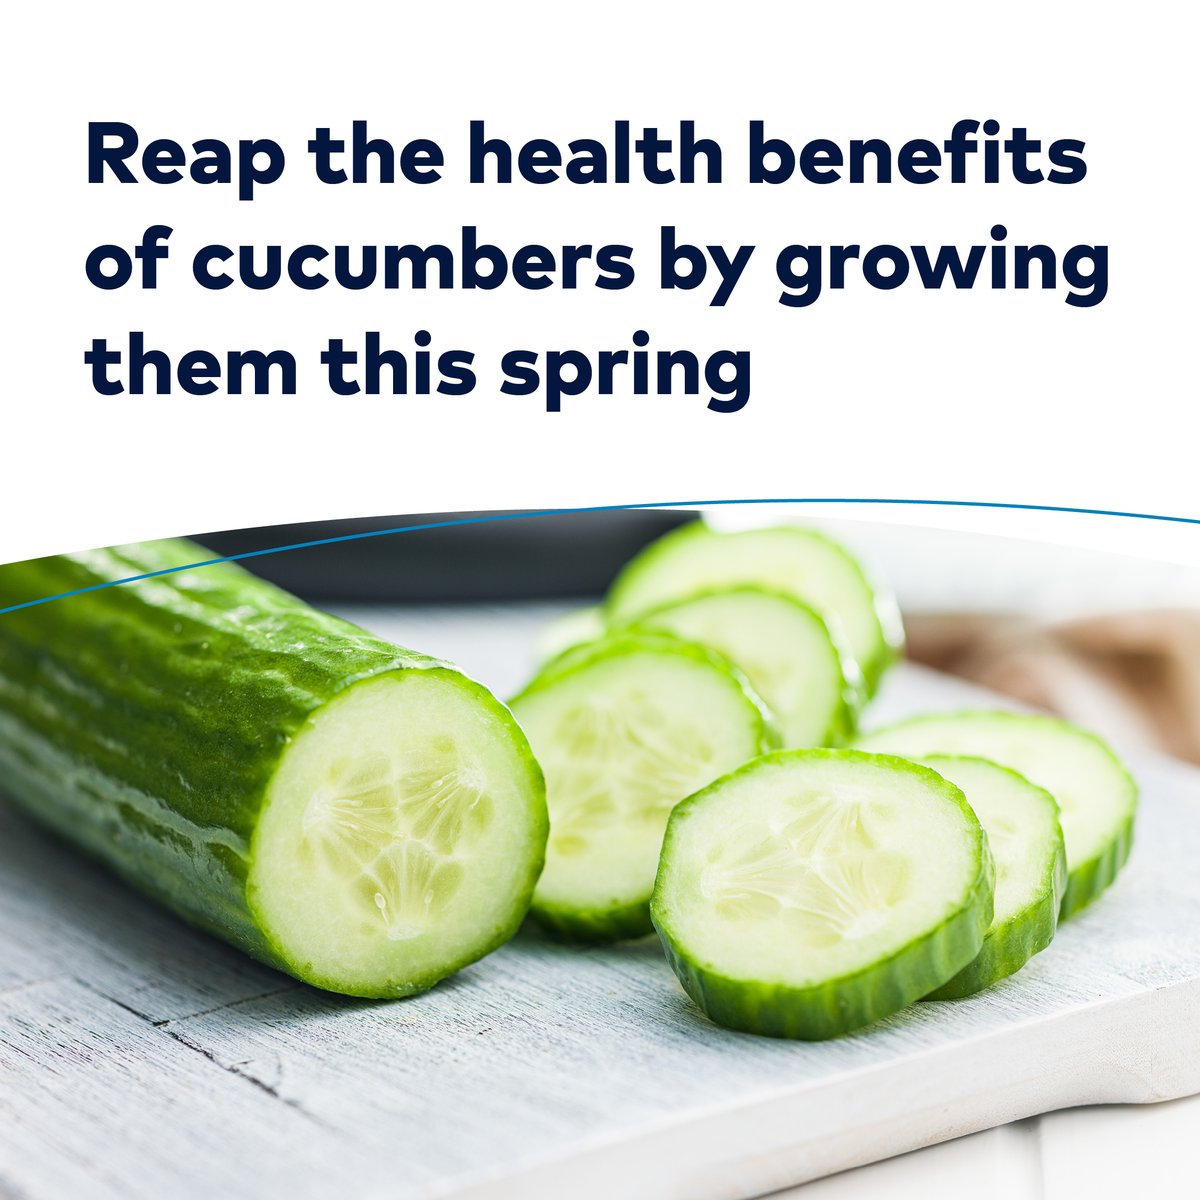 Looking for a fresh addition to your garden? Give cucumbers a try! Here are five health benefits of planting cucumbers in your garden this spring: bit.ly/3K8uoVB #HealthierTomorrows